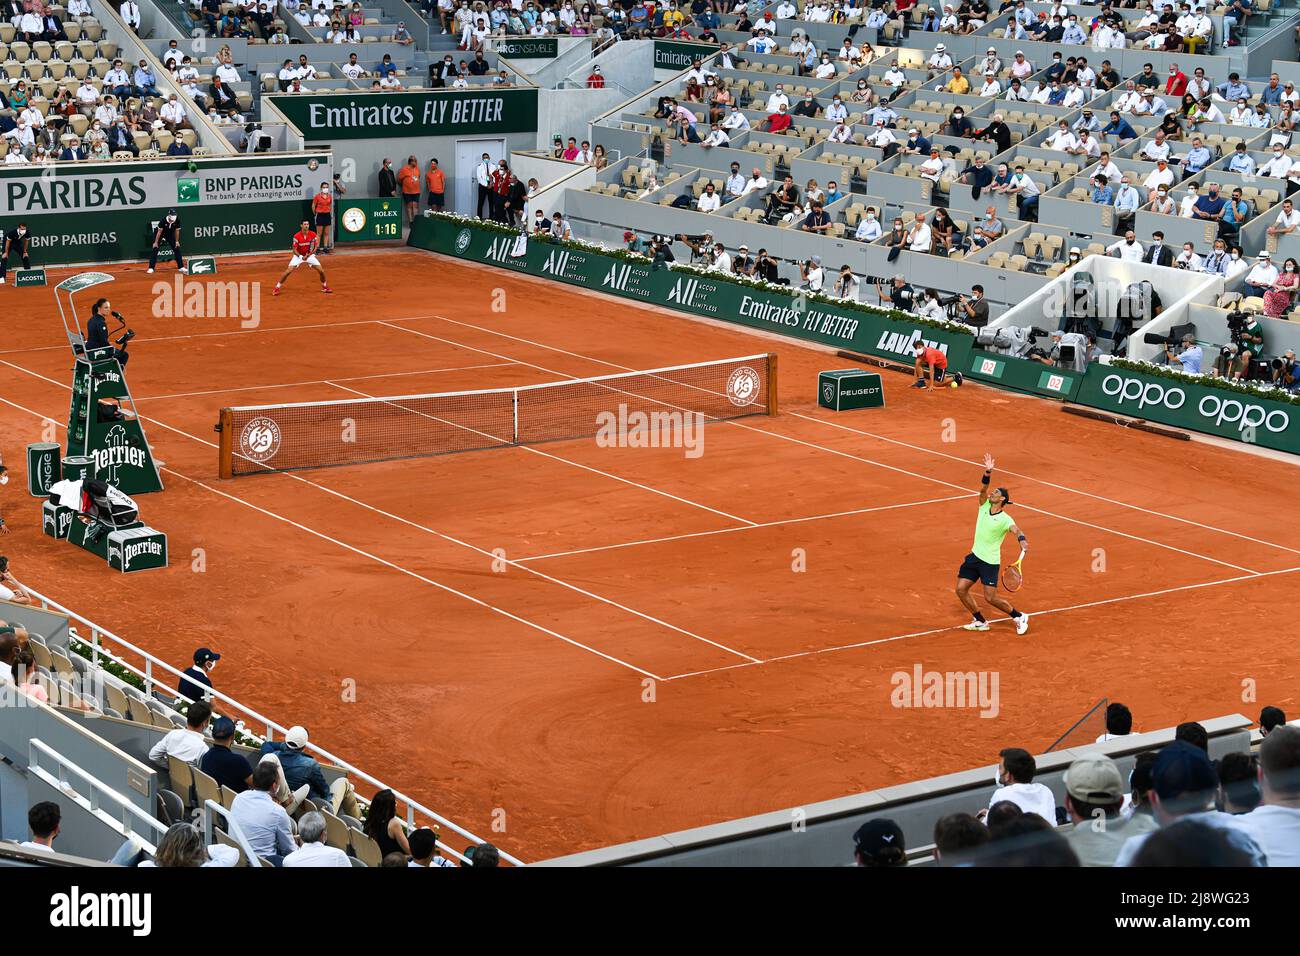 General view of center court with Rafael Nadal serving and Novak Djokovic during the semifinal at Roland-Garros (French Open), Grand Slam tennis tourn Stock Photo